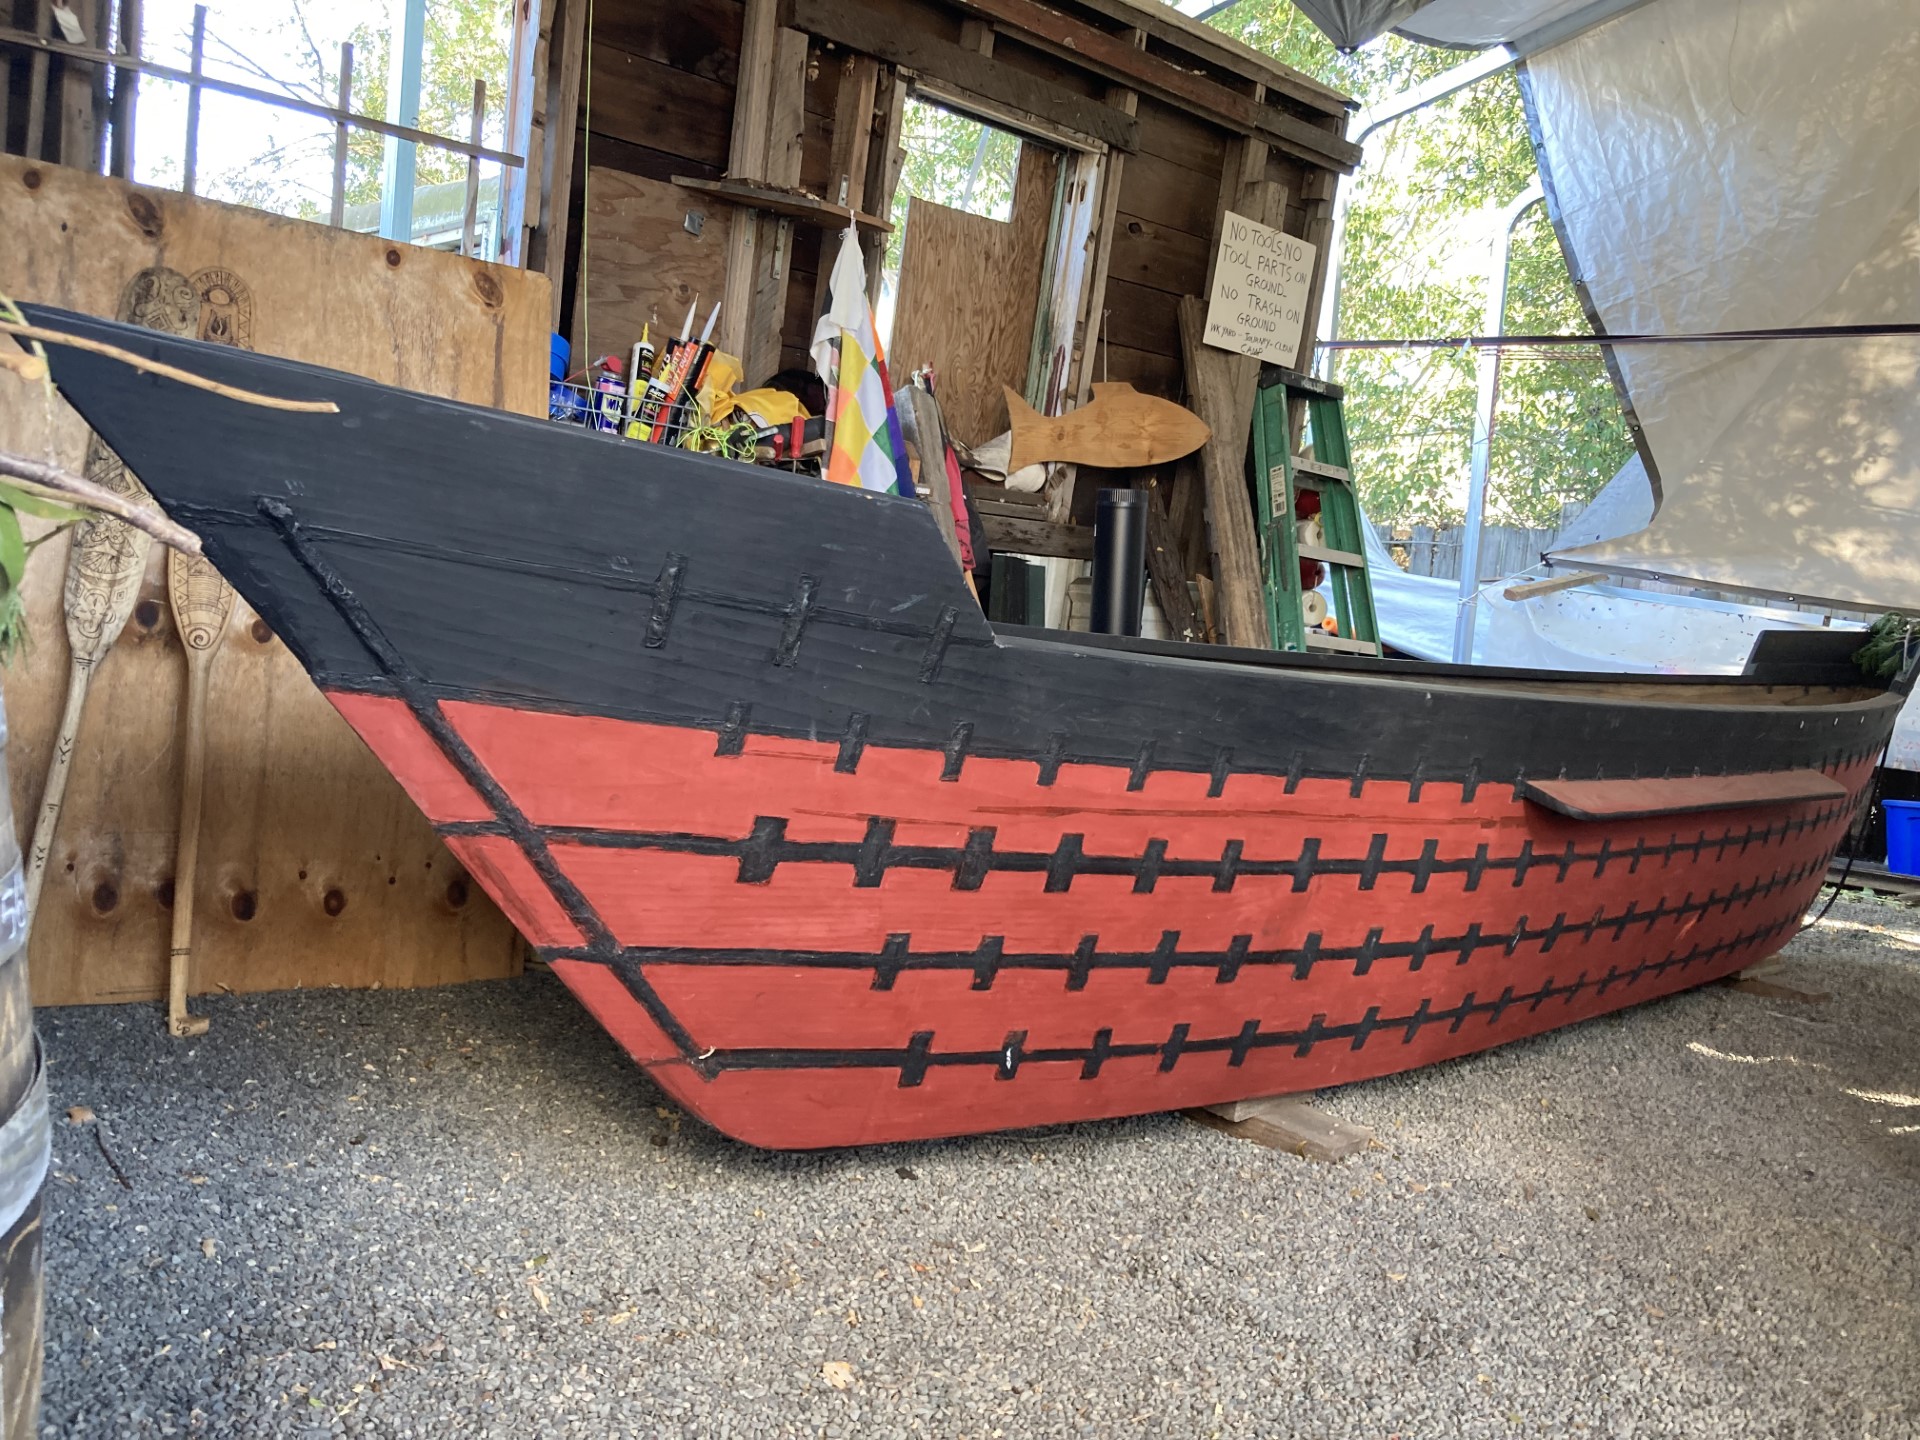 Tii’at (Tongva Canoe) designed and built by Dr. L Frank Manriequez and the Paxiiwovem Canoe Family (indigenous watercraft)